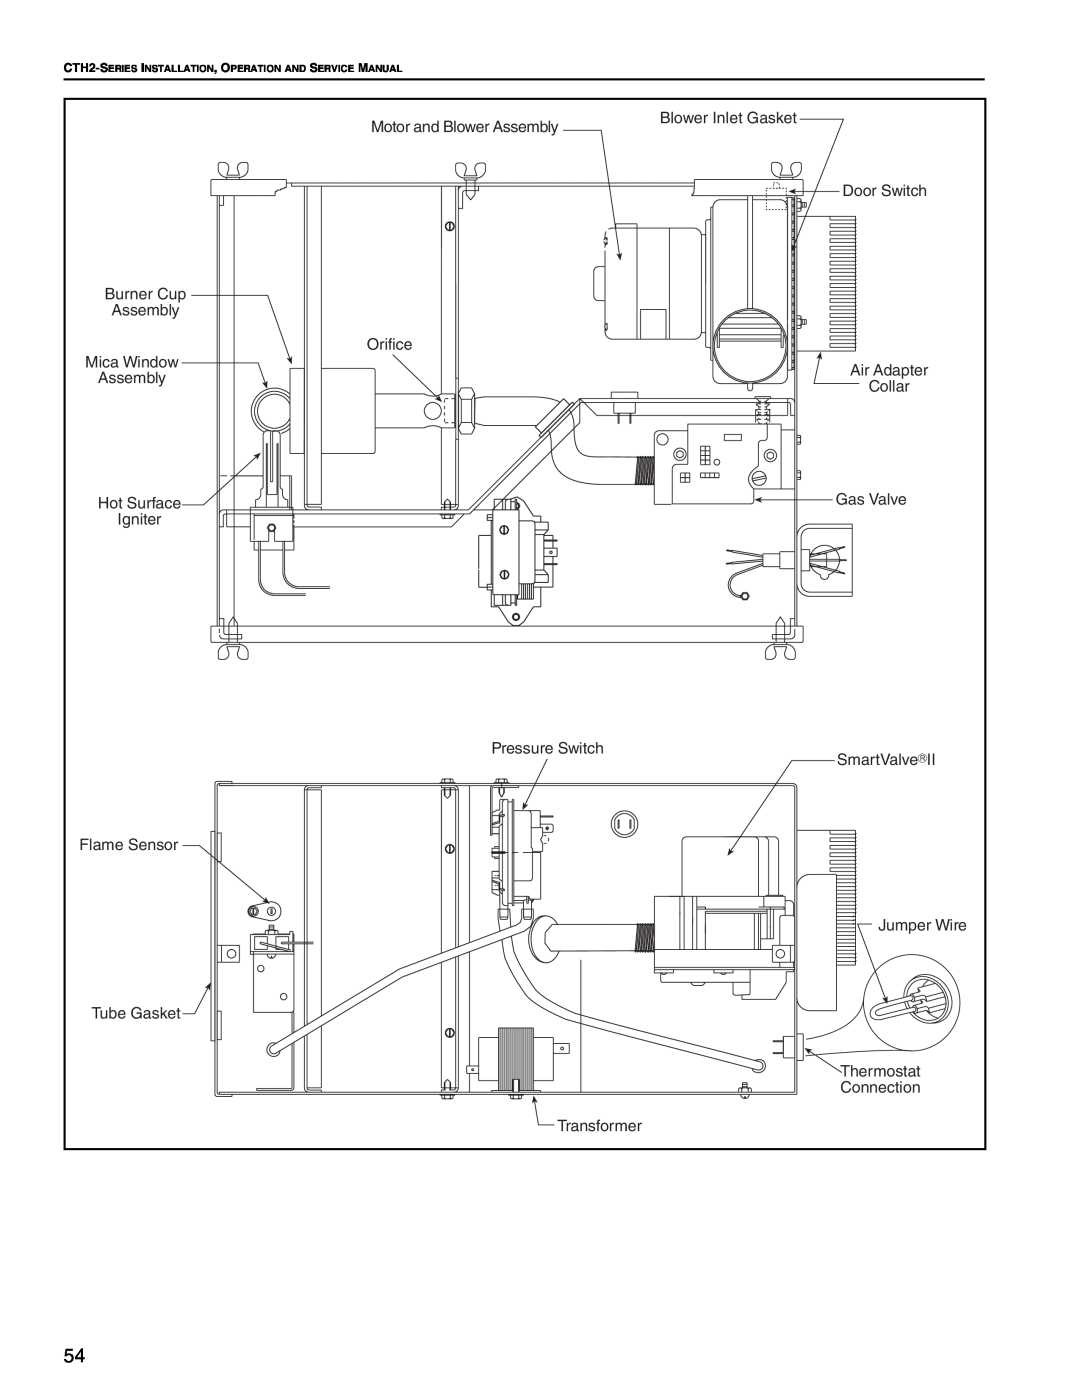 Roberts Gorden CTH2-125, CTH2-80, CTH2-100, CTH2-150, CTH2-175, CTH2-40 CTH2-60 service manual Motor and Blower Assembly 